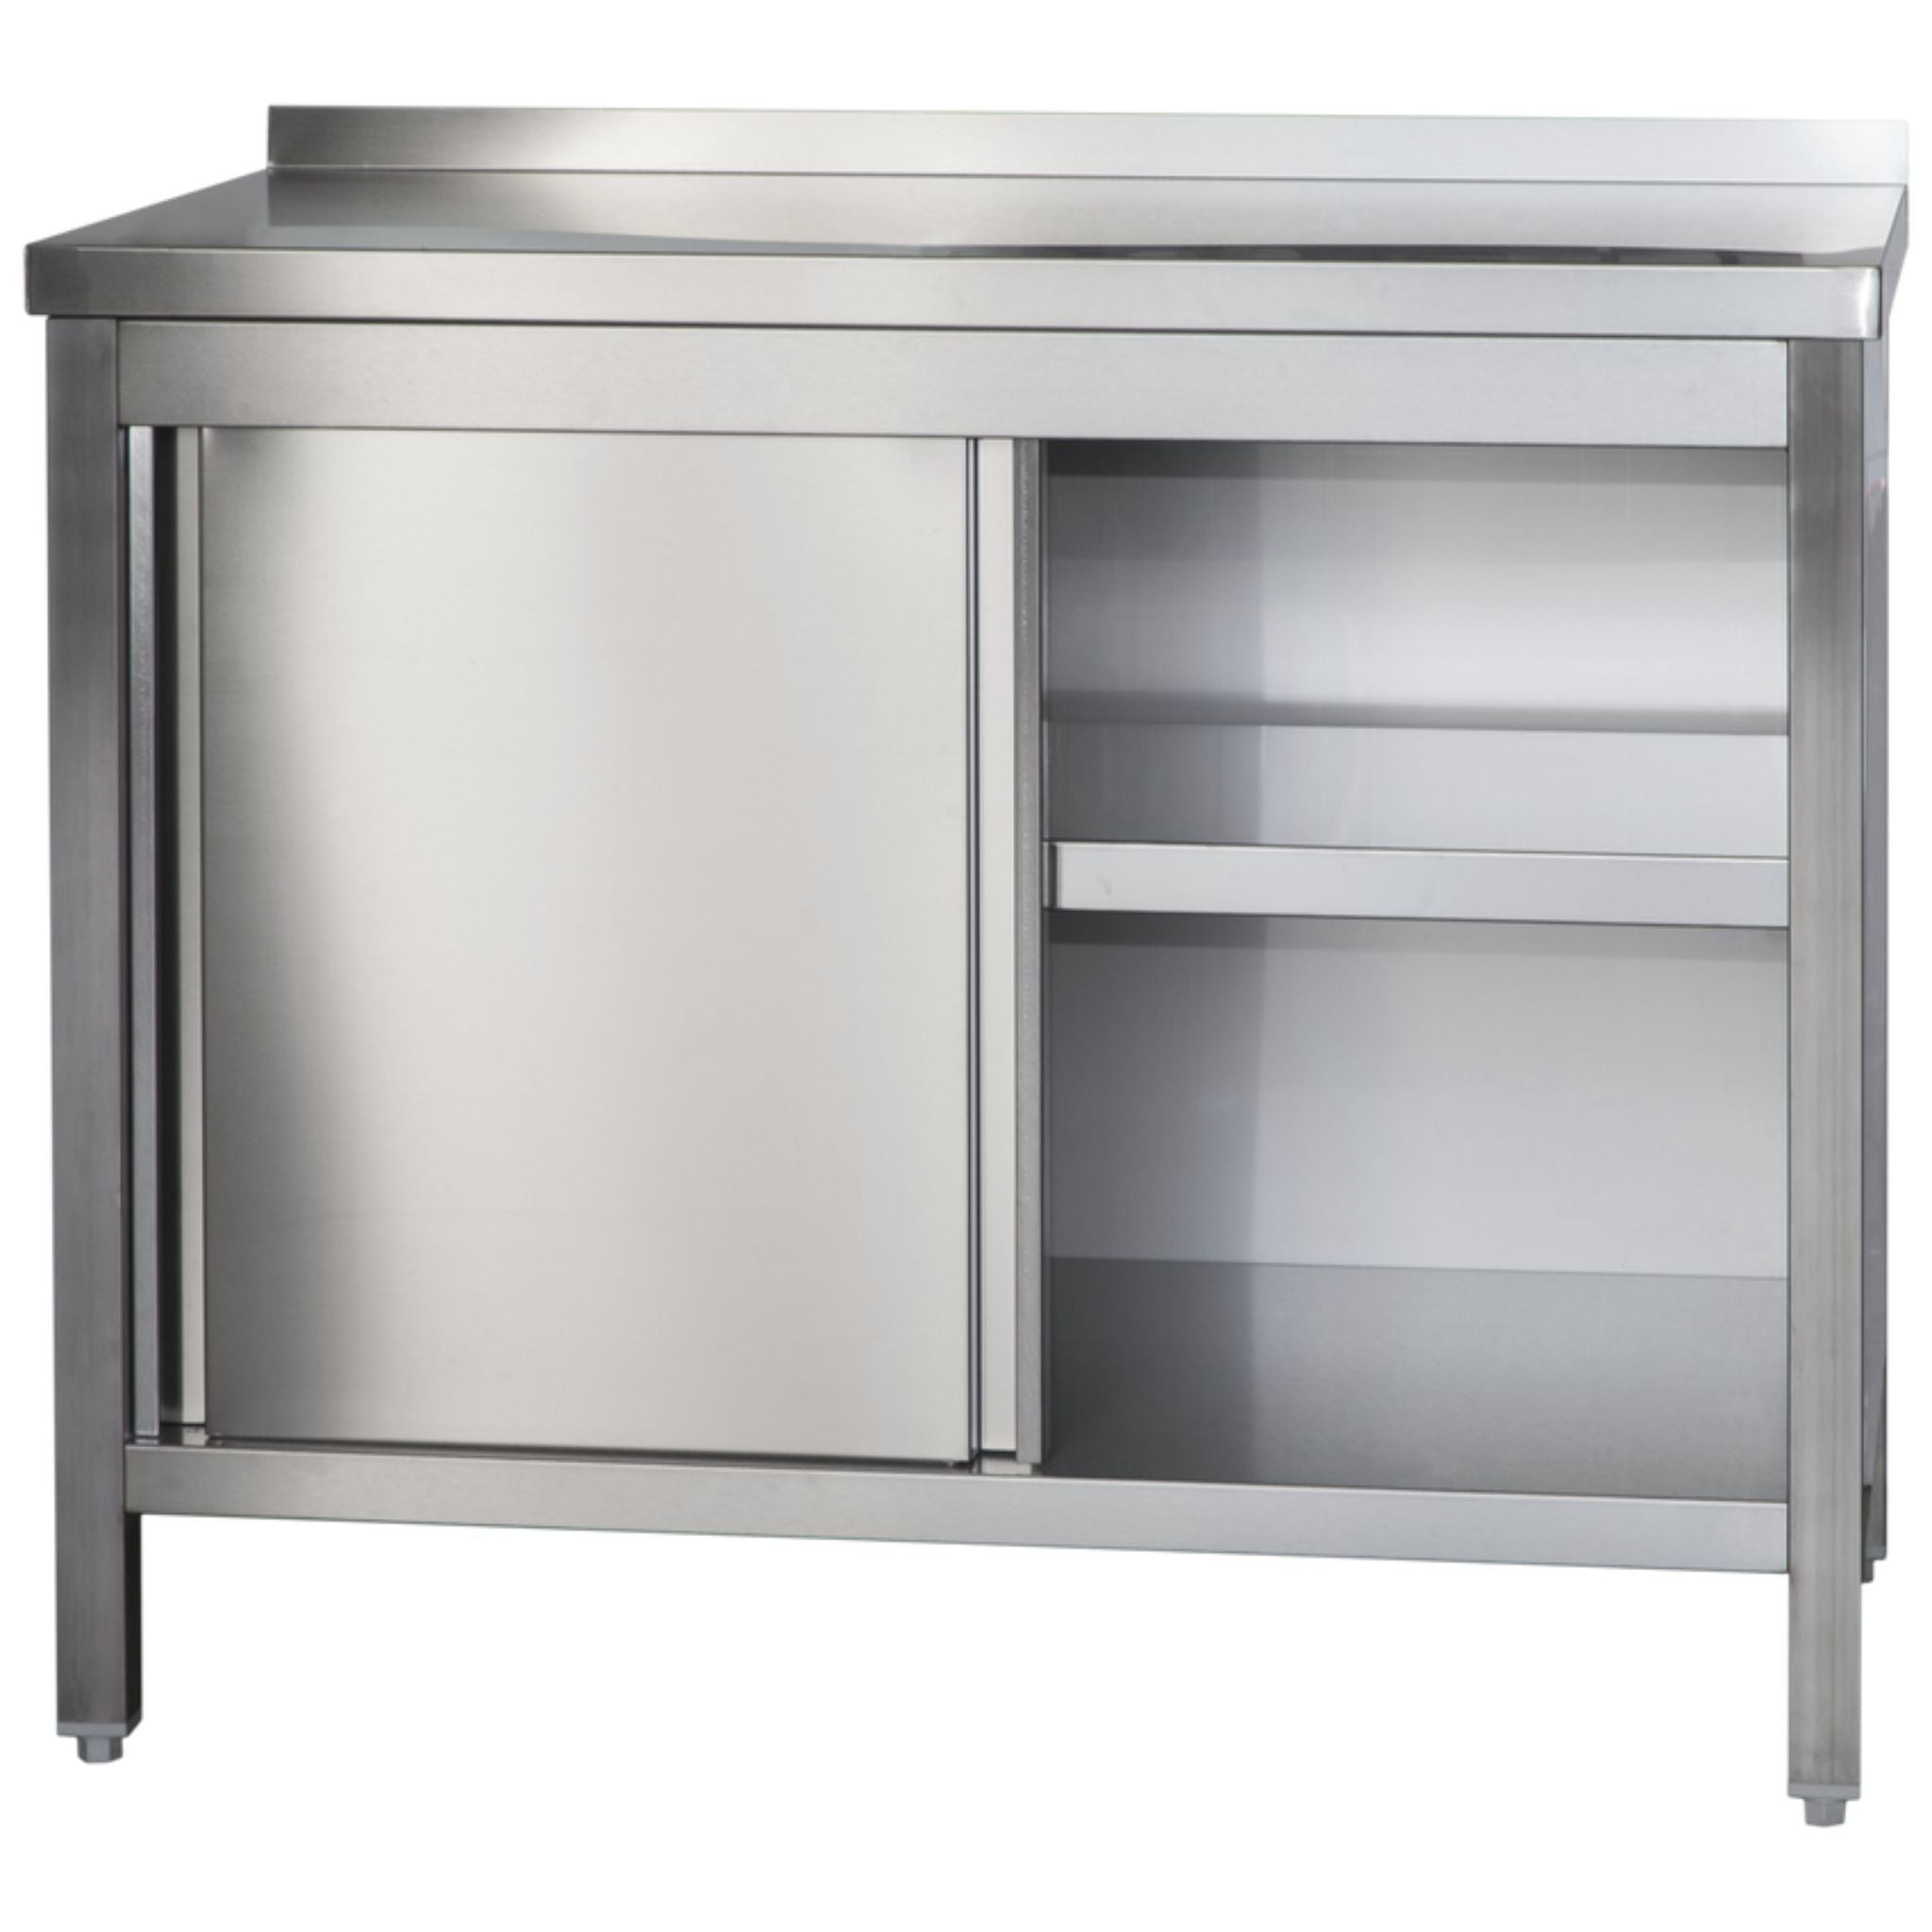 Professional stainless steel work cabinet with sliding doors